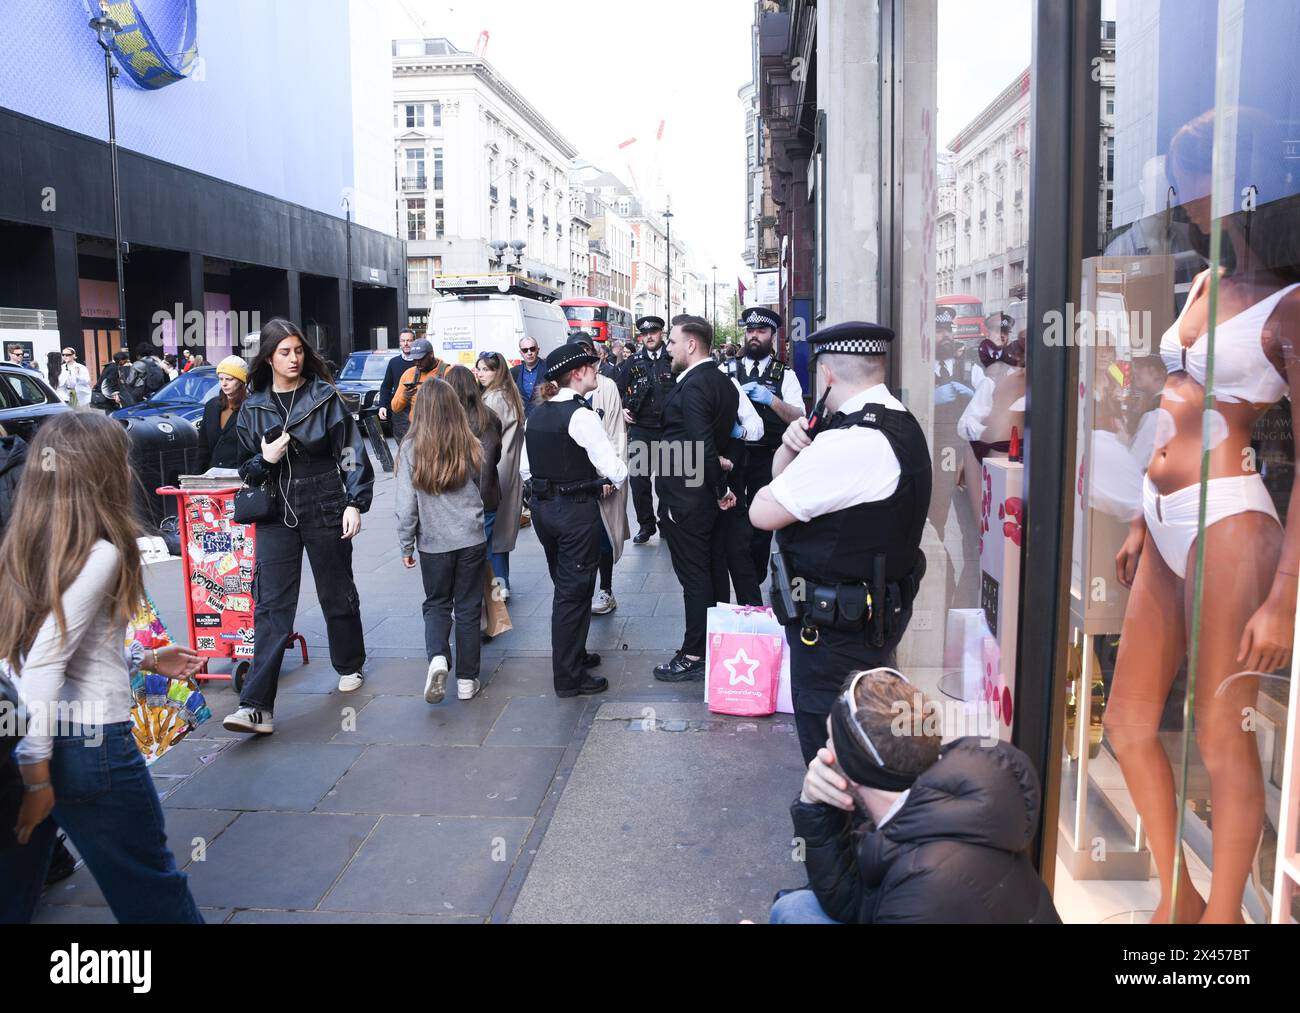 facial recognition system at Oxford Circus flagged up a suspected ...